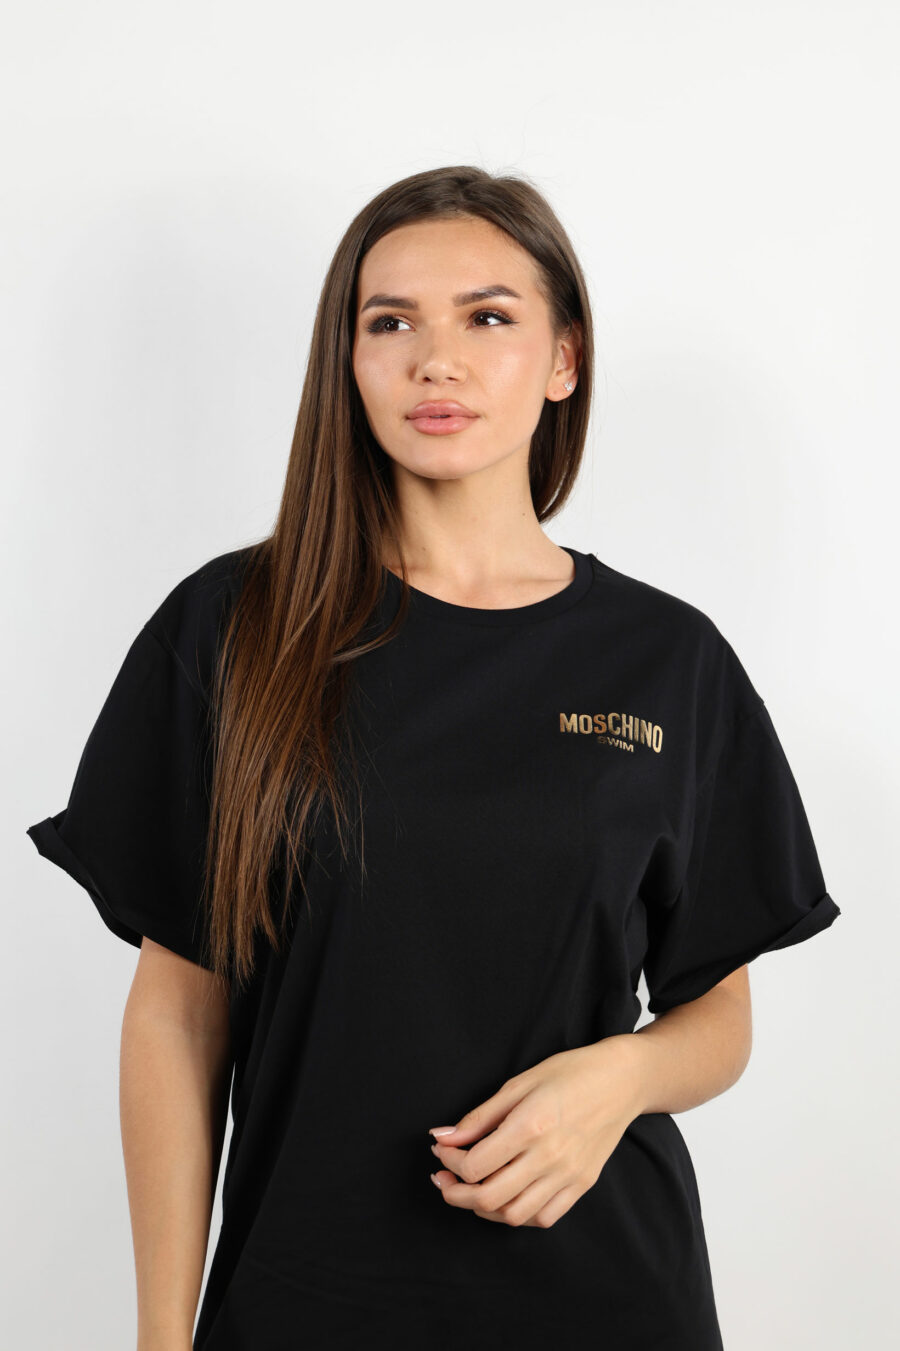 Black dress with gold lettering logo - 109523